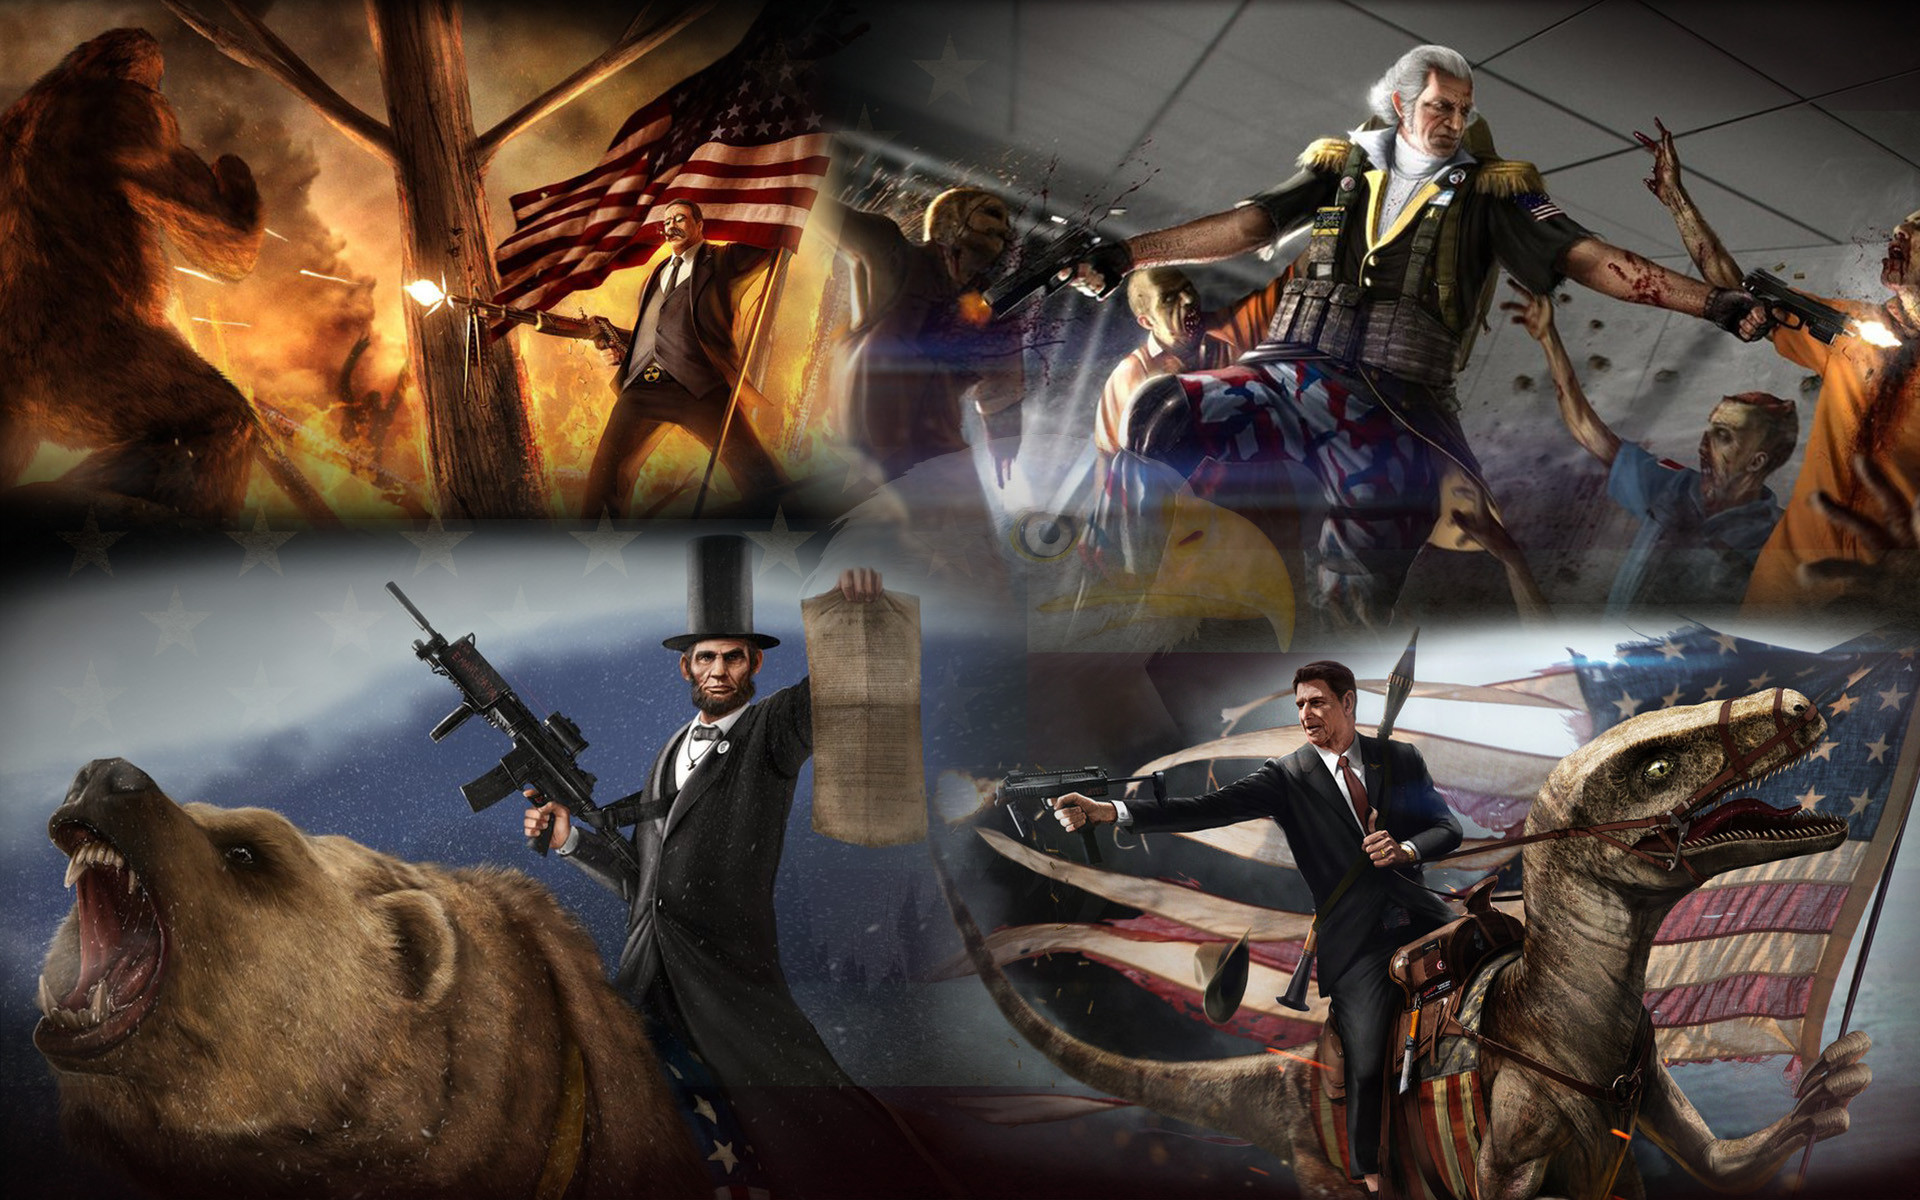 Extra I Present To You The Most American Wallpaper Ever Pics